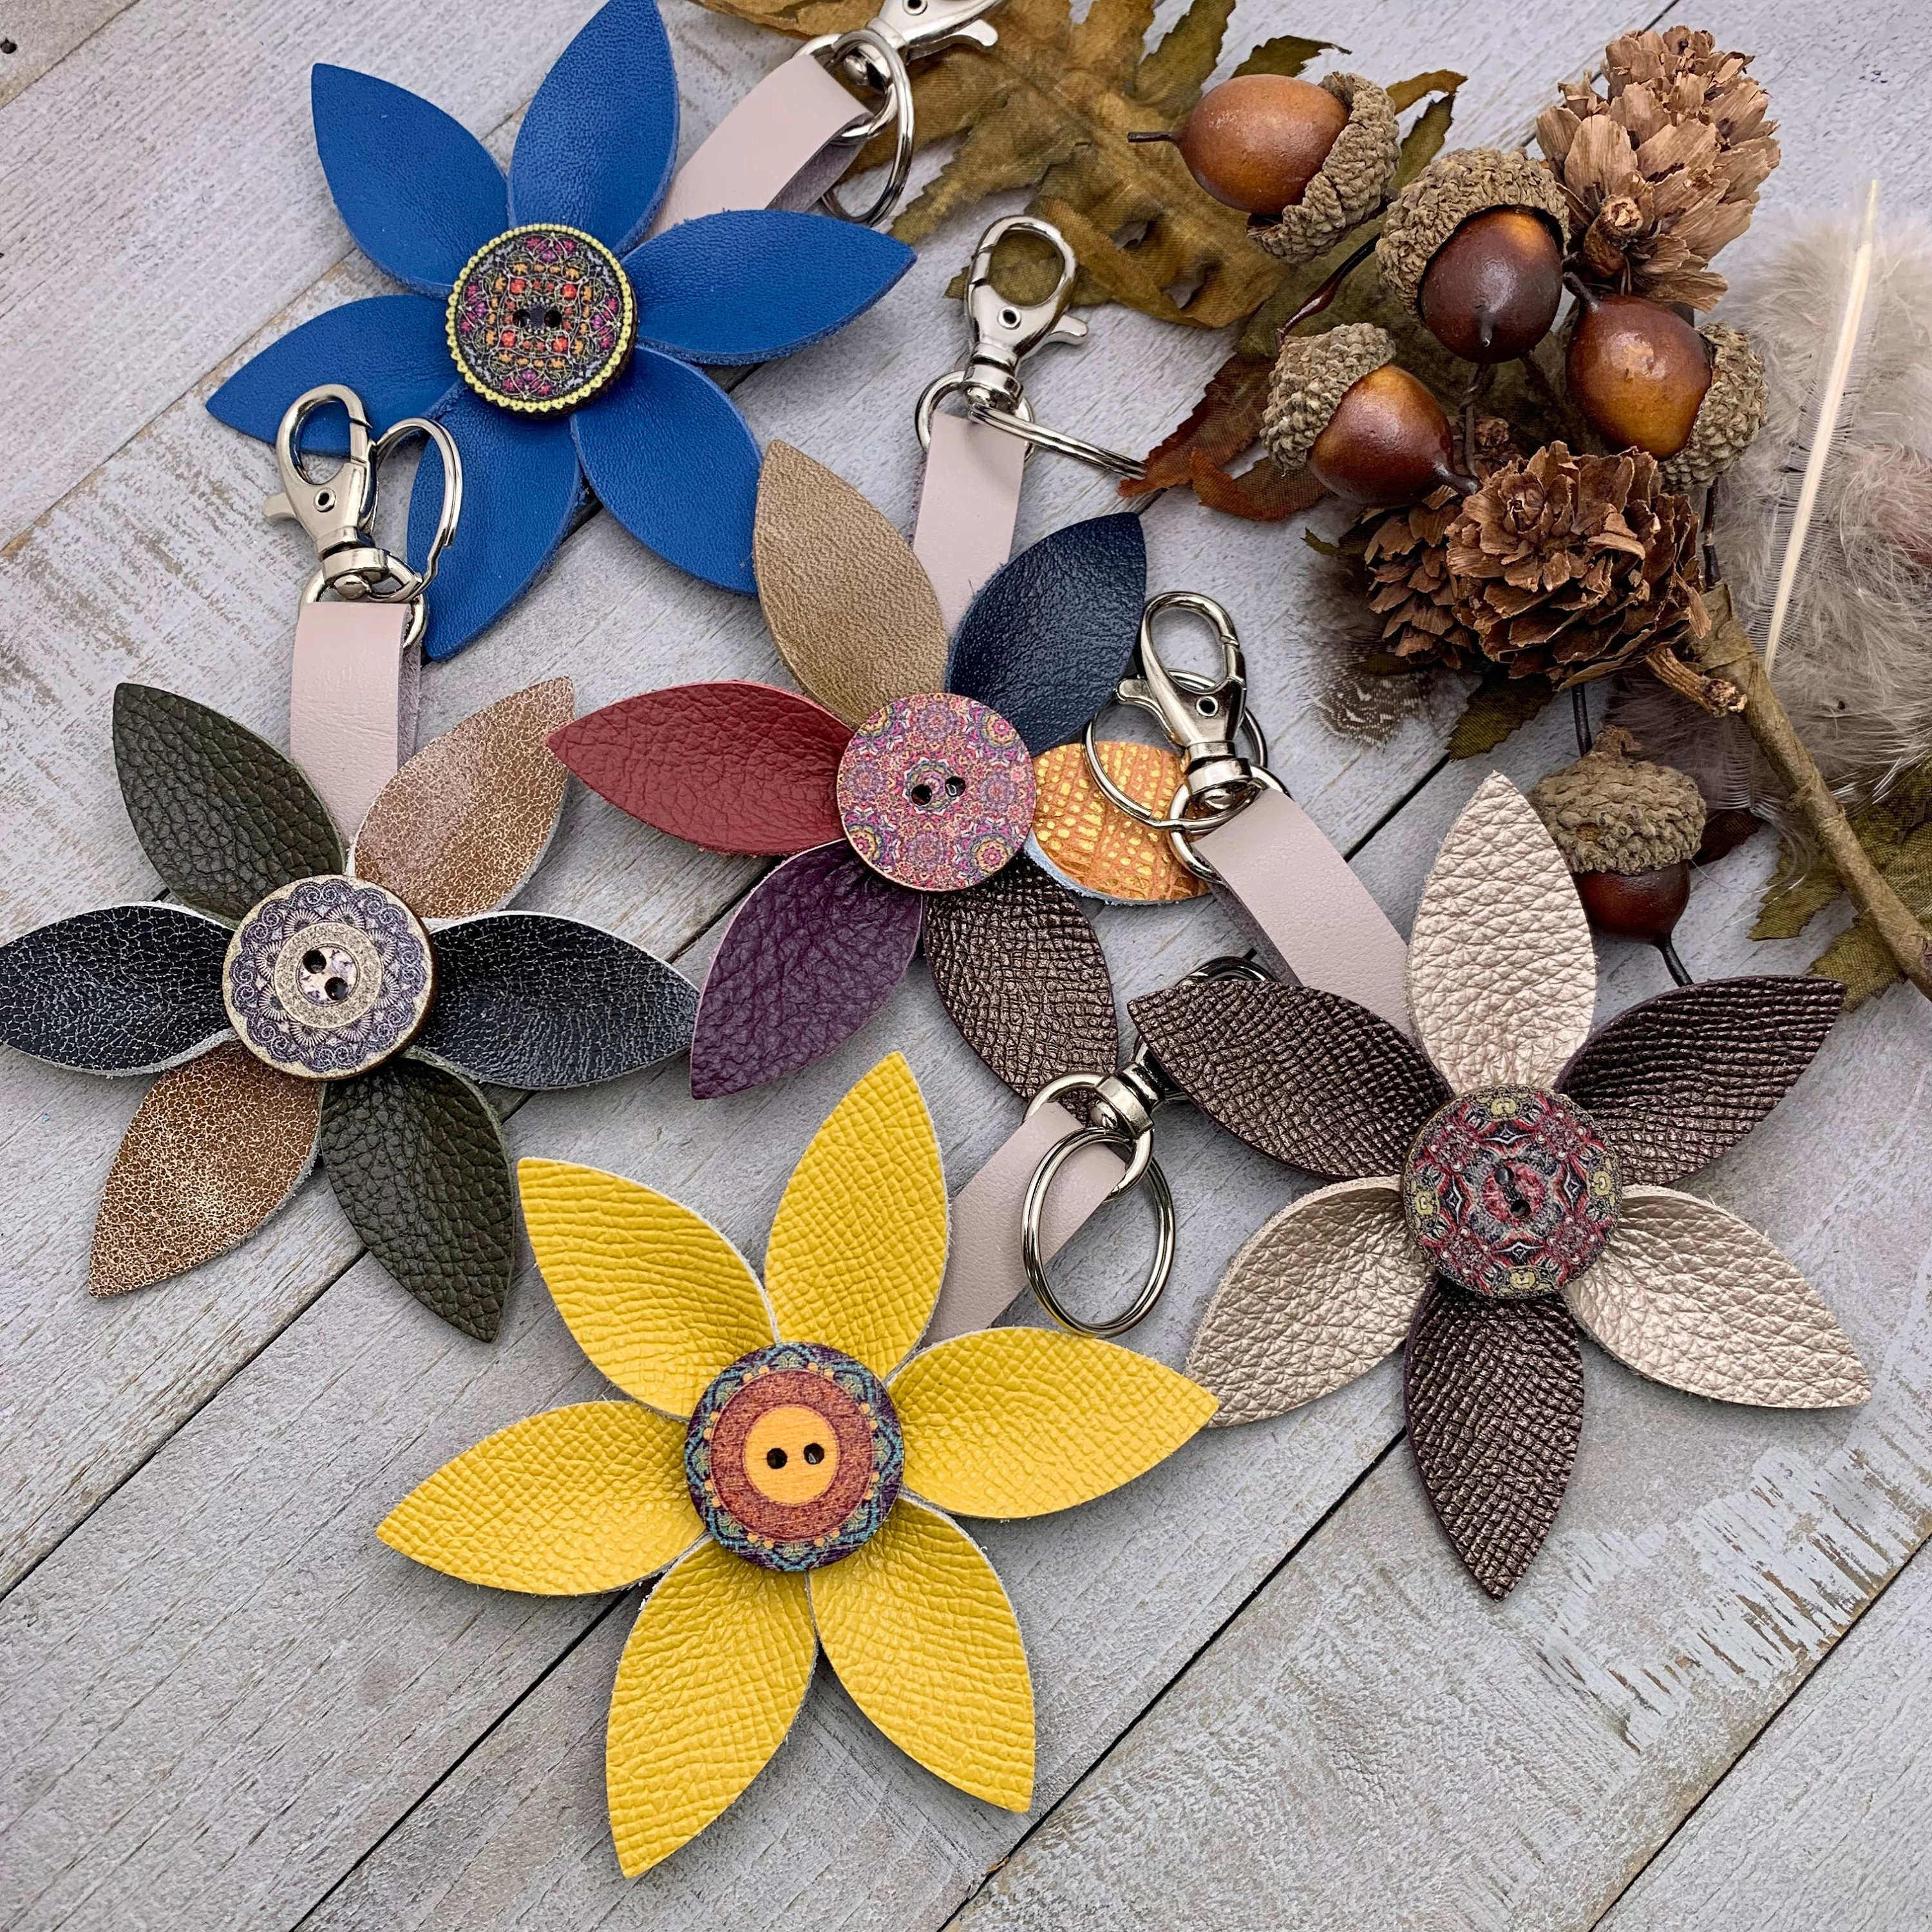 Buy Custom Leather Flower Bag Charms Online in India 